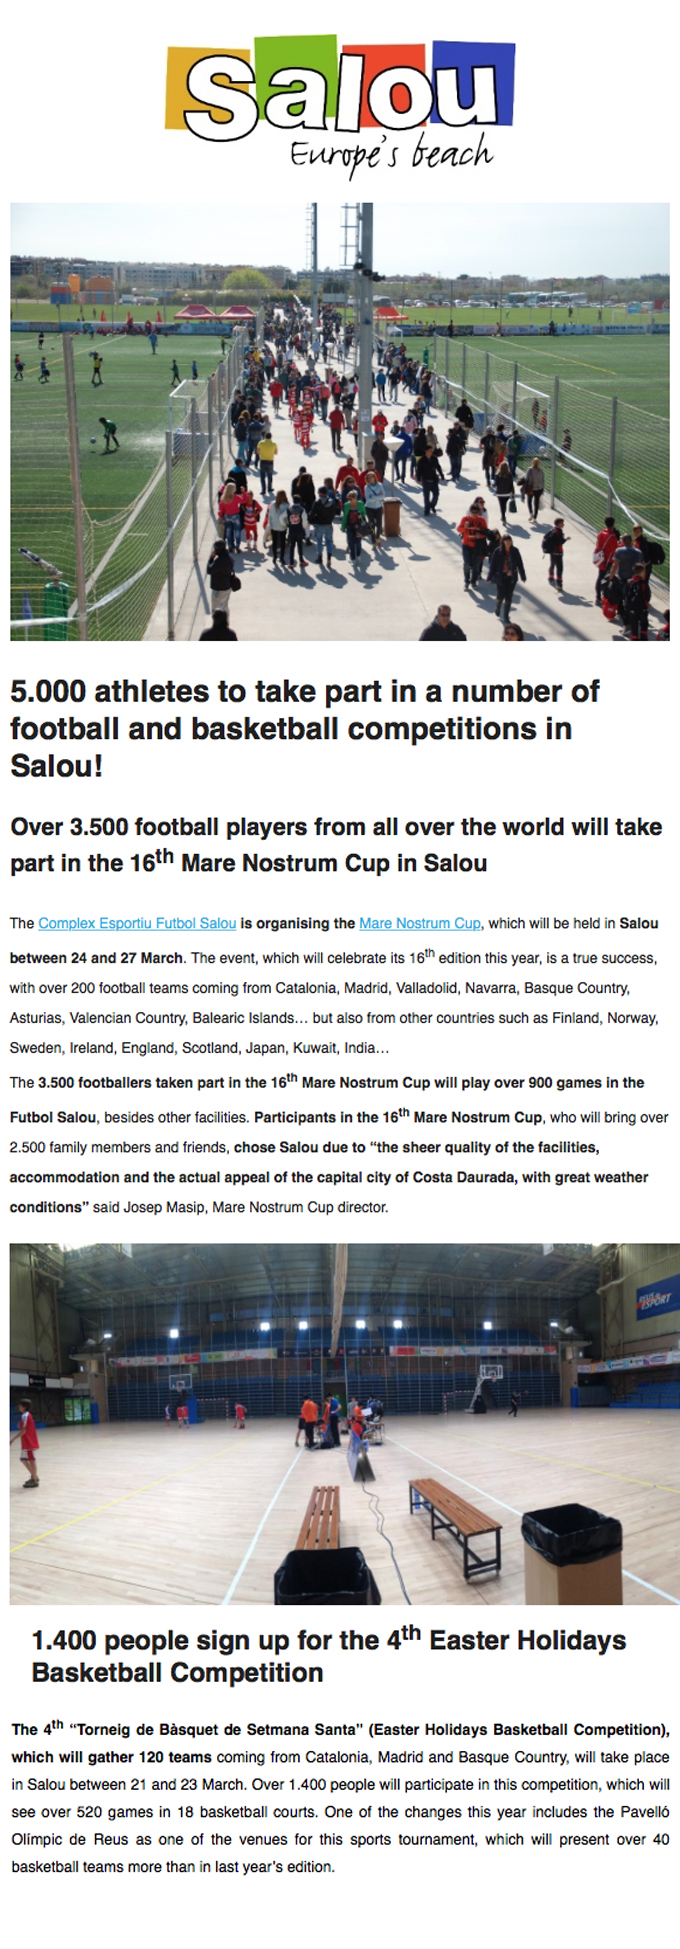 5.000 athletes to take part in a number of football and basketball competitions in Salou